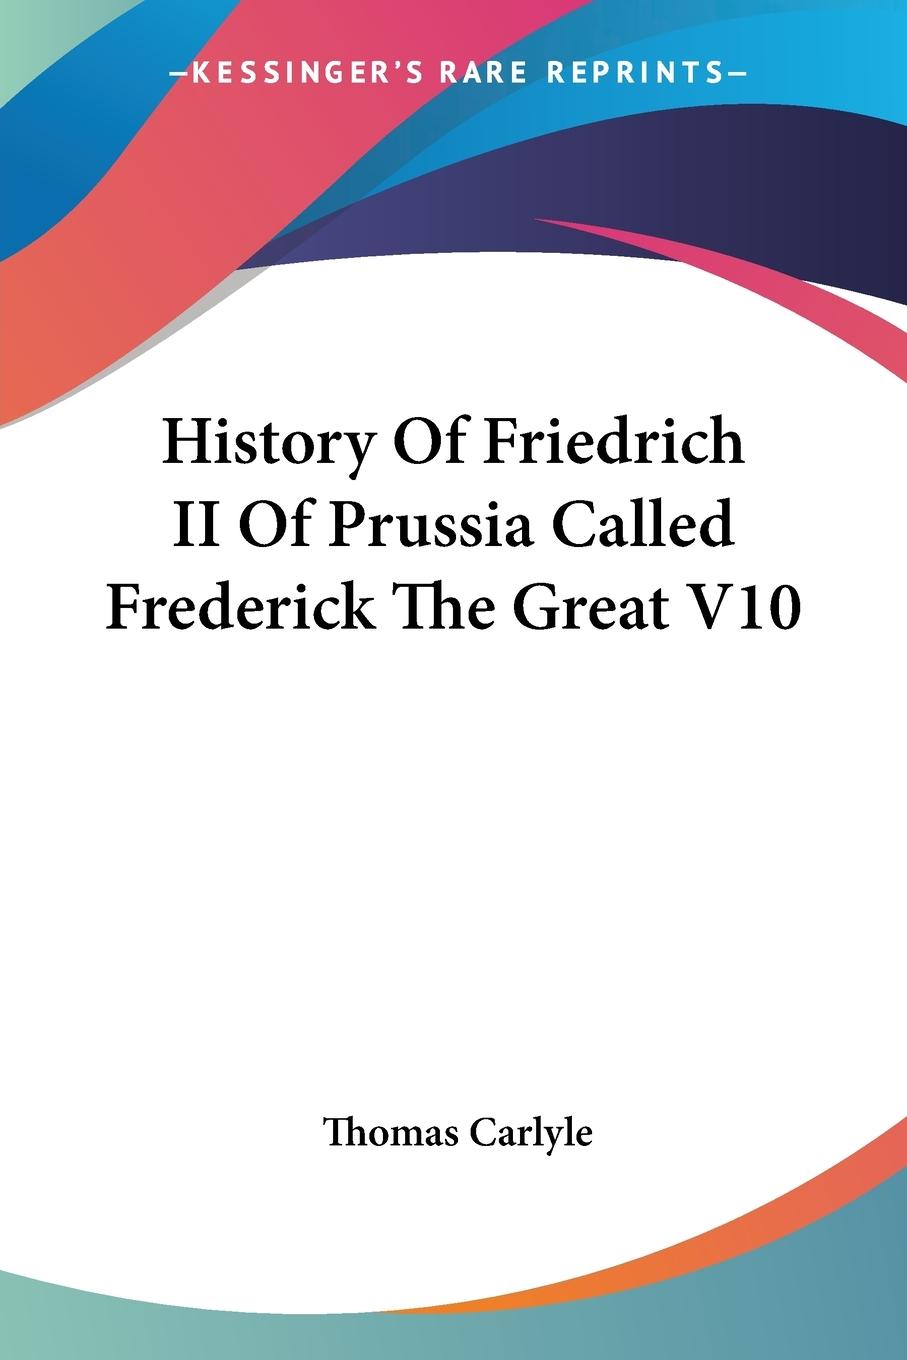 History Of Friedrich II Of Prussia Called Frederick The Great V10 - Carlyle, Thomas